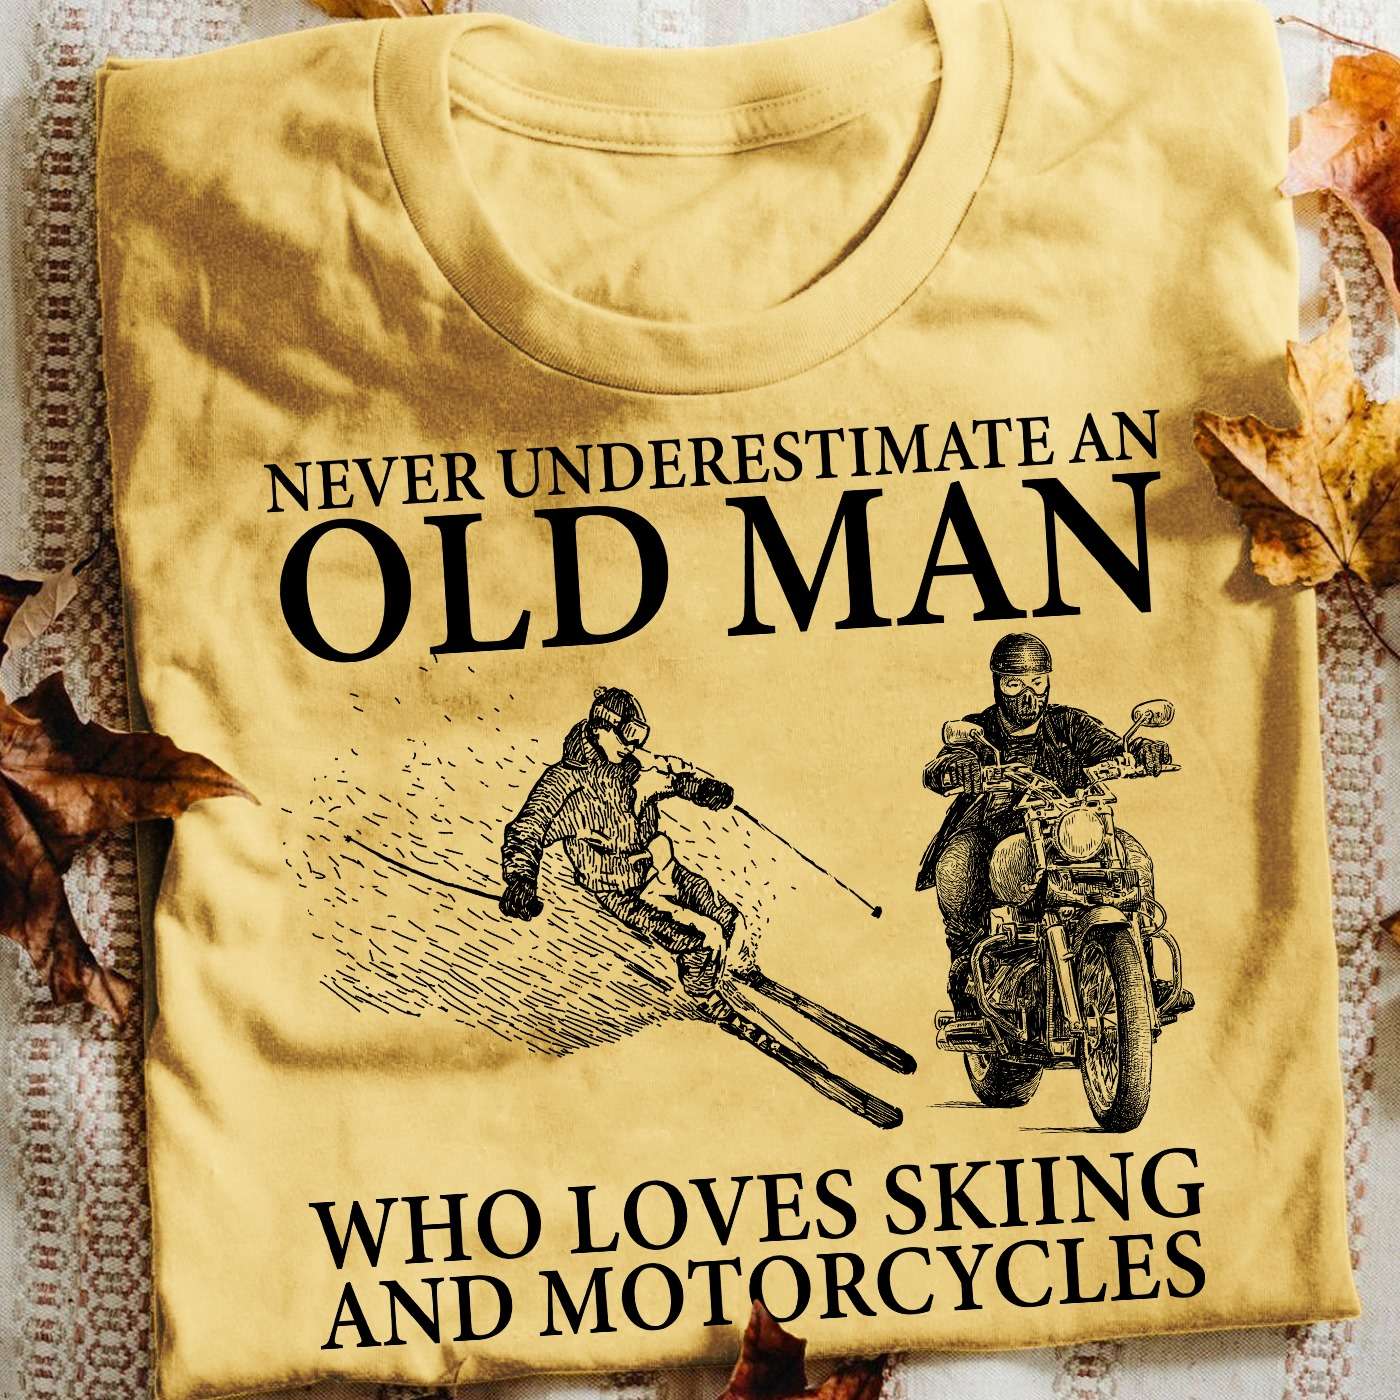 Never underestimate an old man who loves skiing and motorcycles